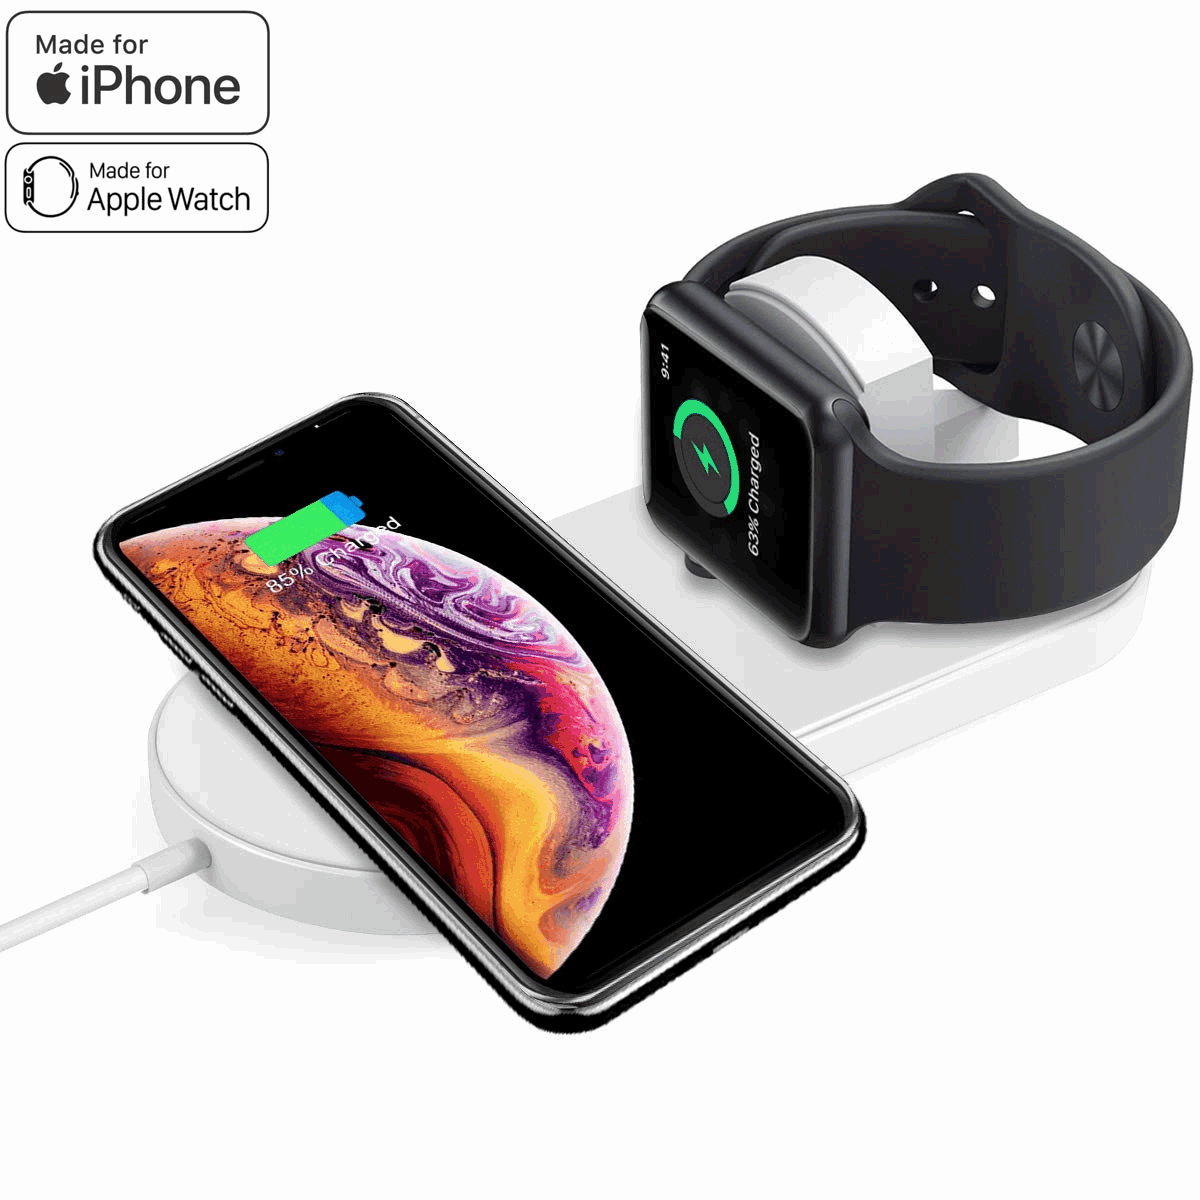 COSOOS Wireless Charger,2in1 Qi Wireless Charging Pad,Dual Charging Mat Compatible with iWatch Series 5/4/3/2/1,iPhone 11Pro Max/11Pro/11/XS Max/Xr/X/8 Plus/8 Airpods Pro/2 with QC3.0 Adapter 